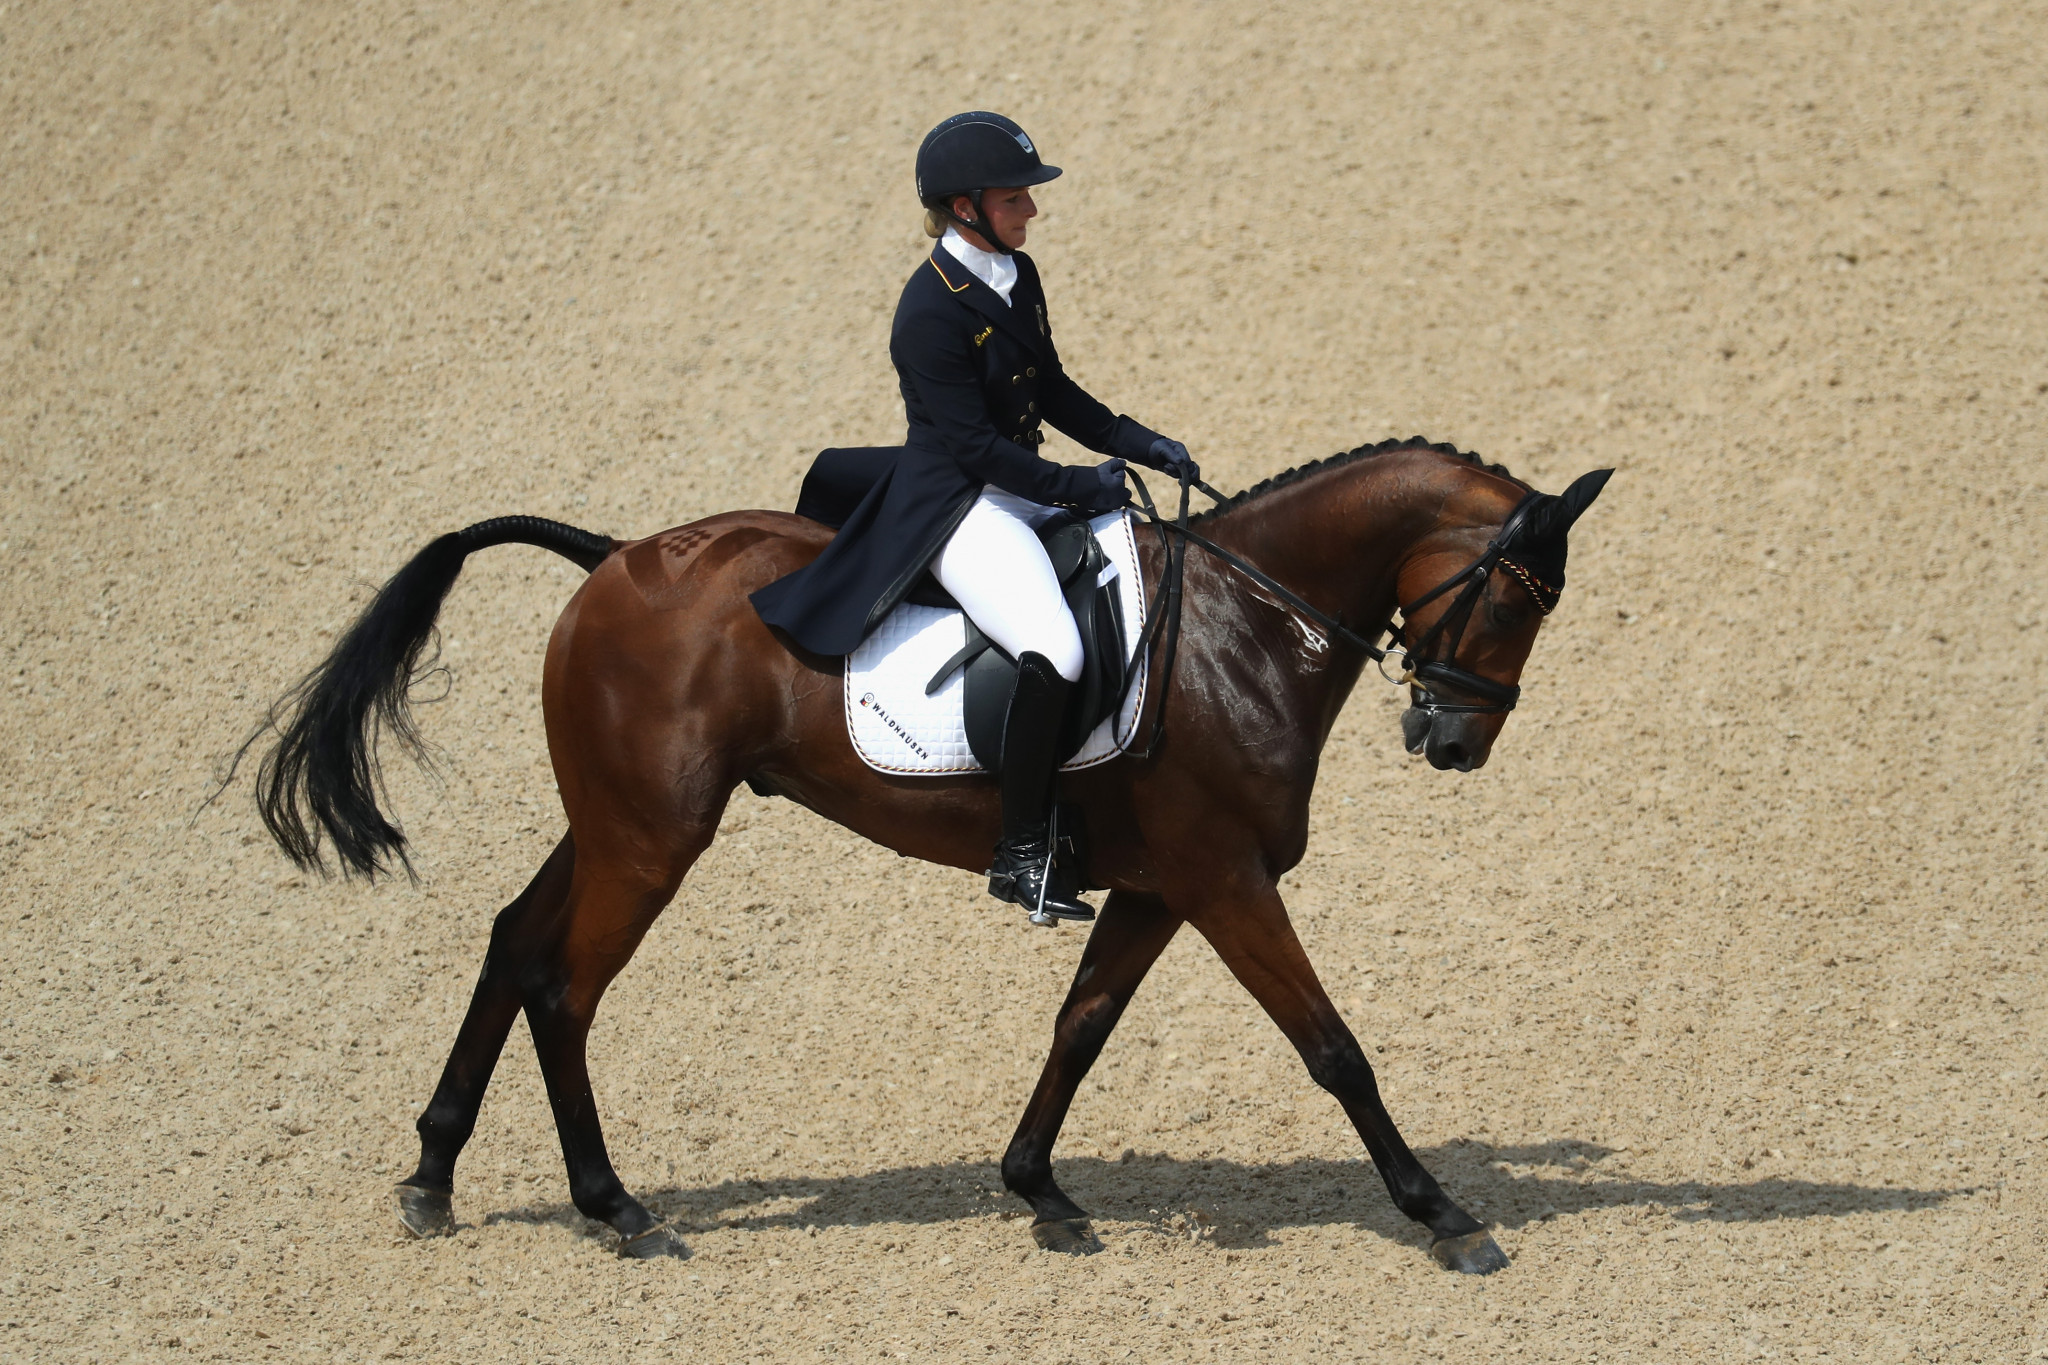 Julia Krajewski and Samourai Du Thot were the second best performers today for Germany ©Getty Images